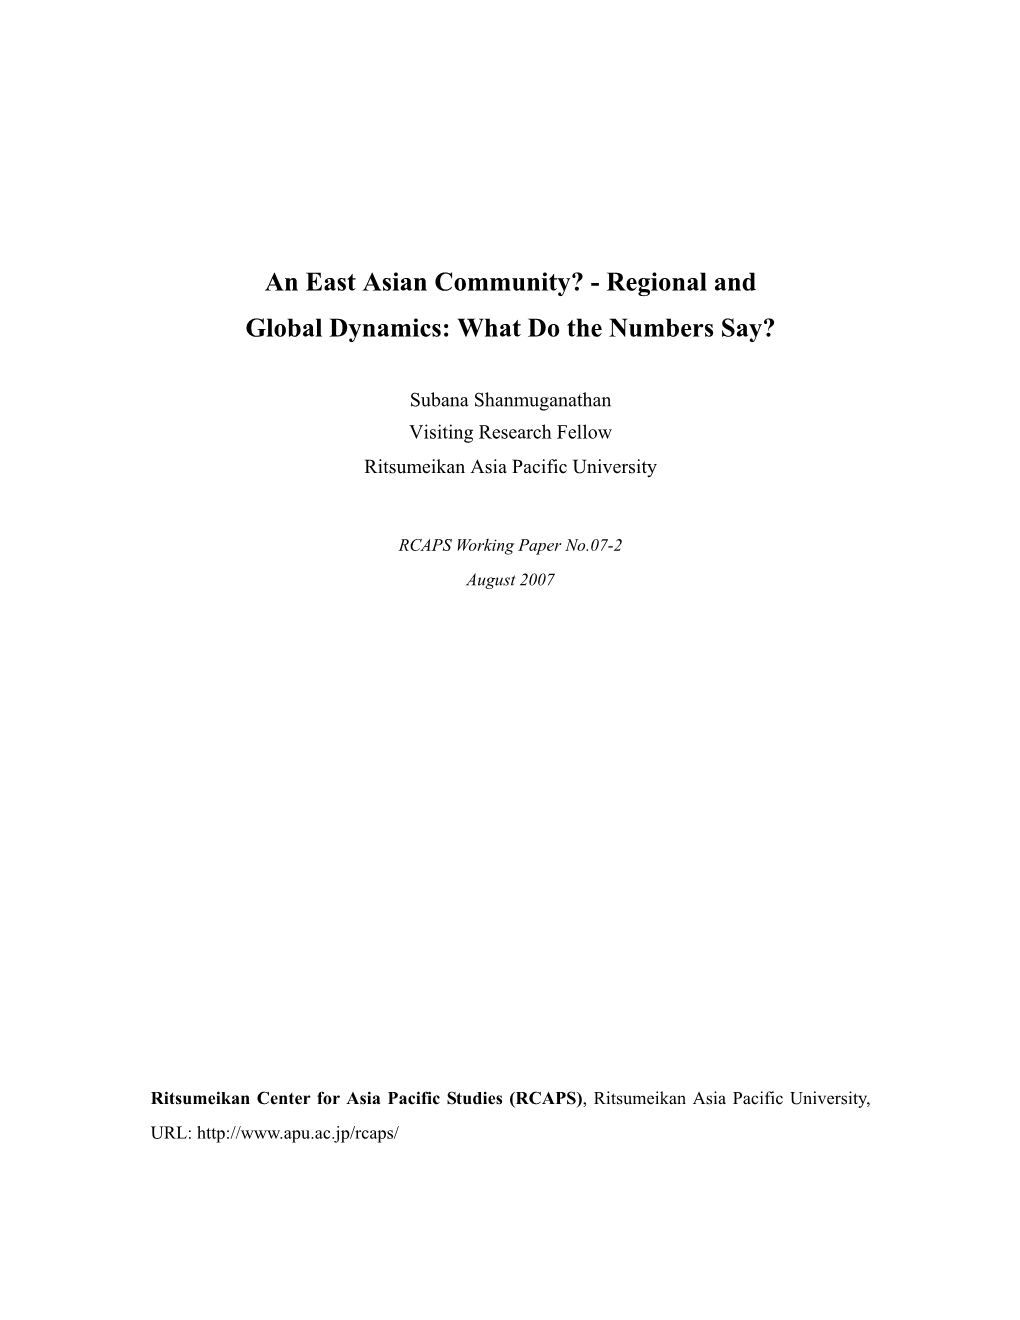 An East Asian Community? - Regional and Global Dynamics: What Do the Numbers Say?